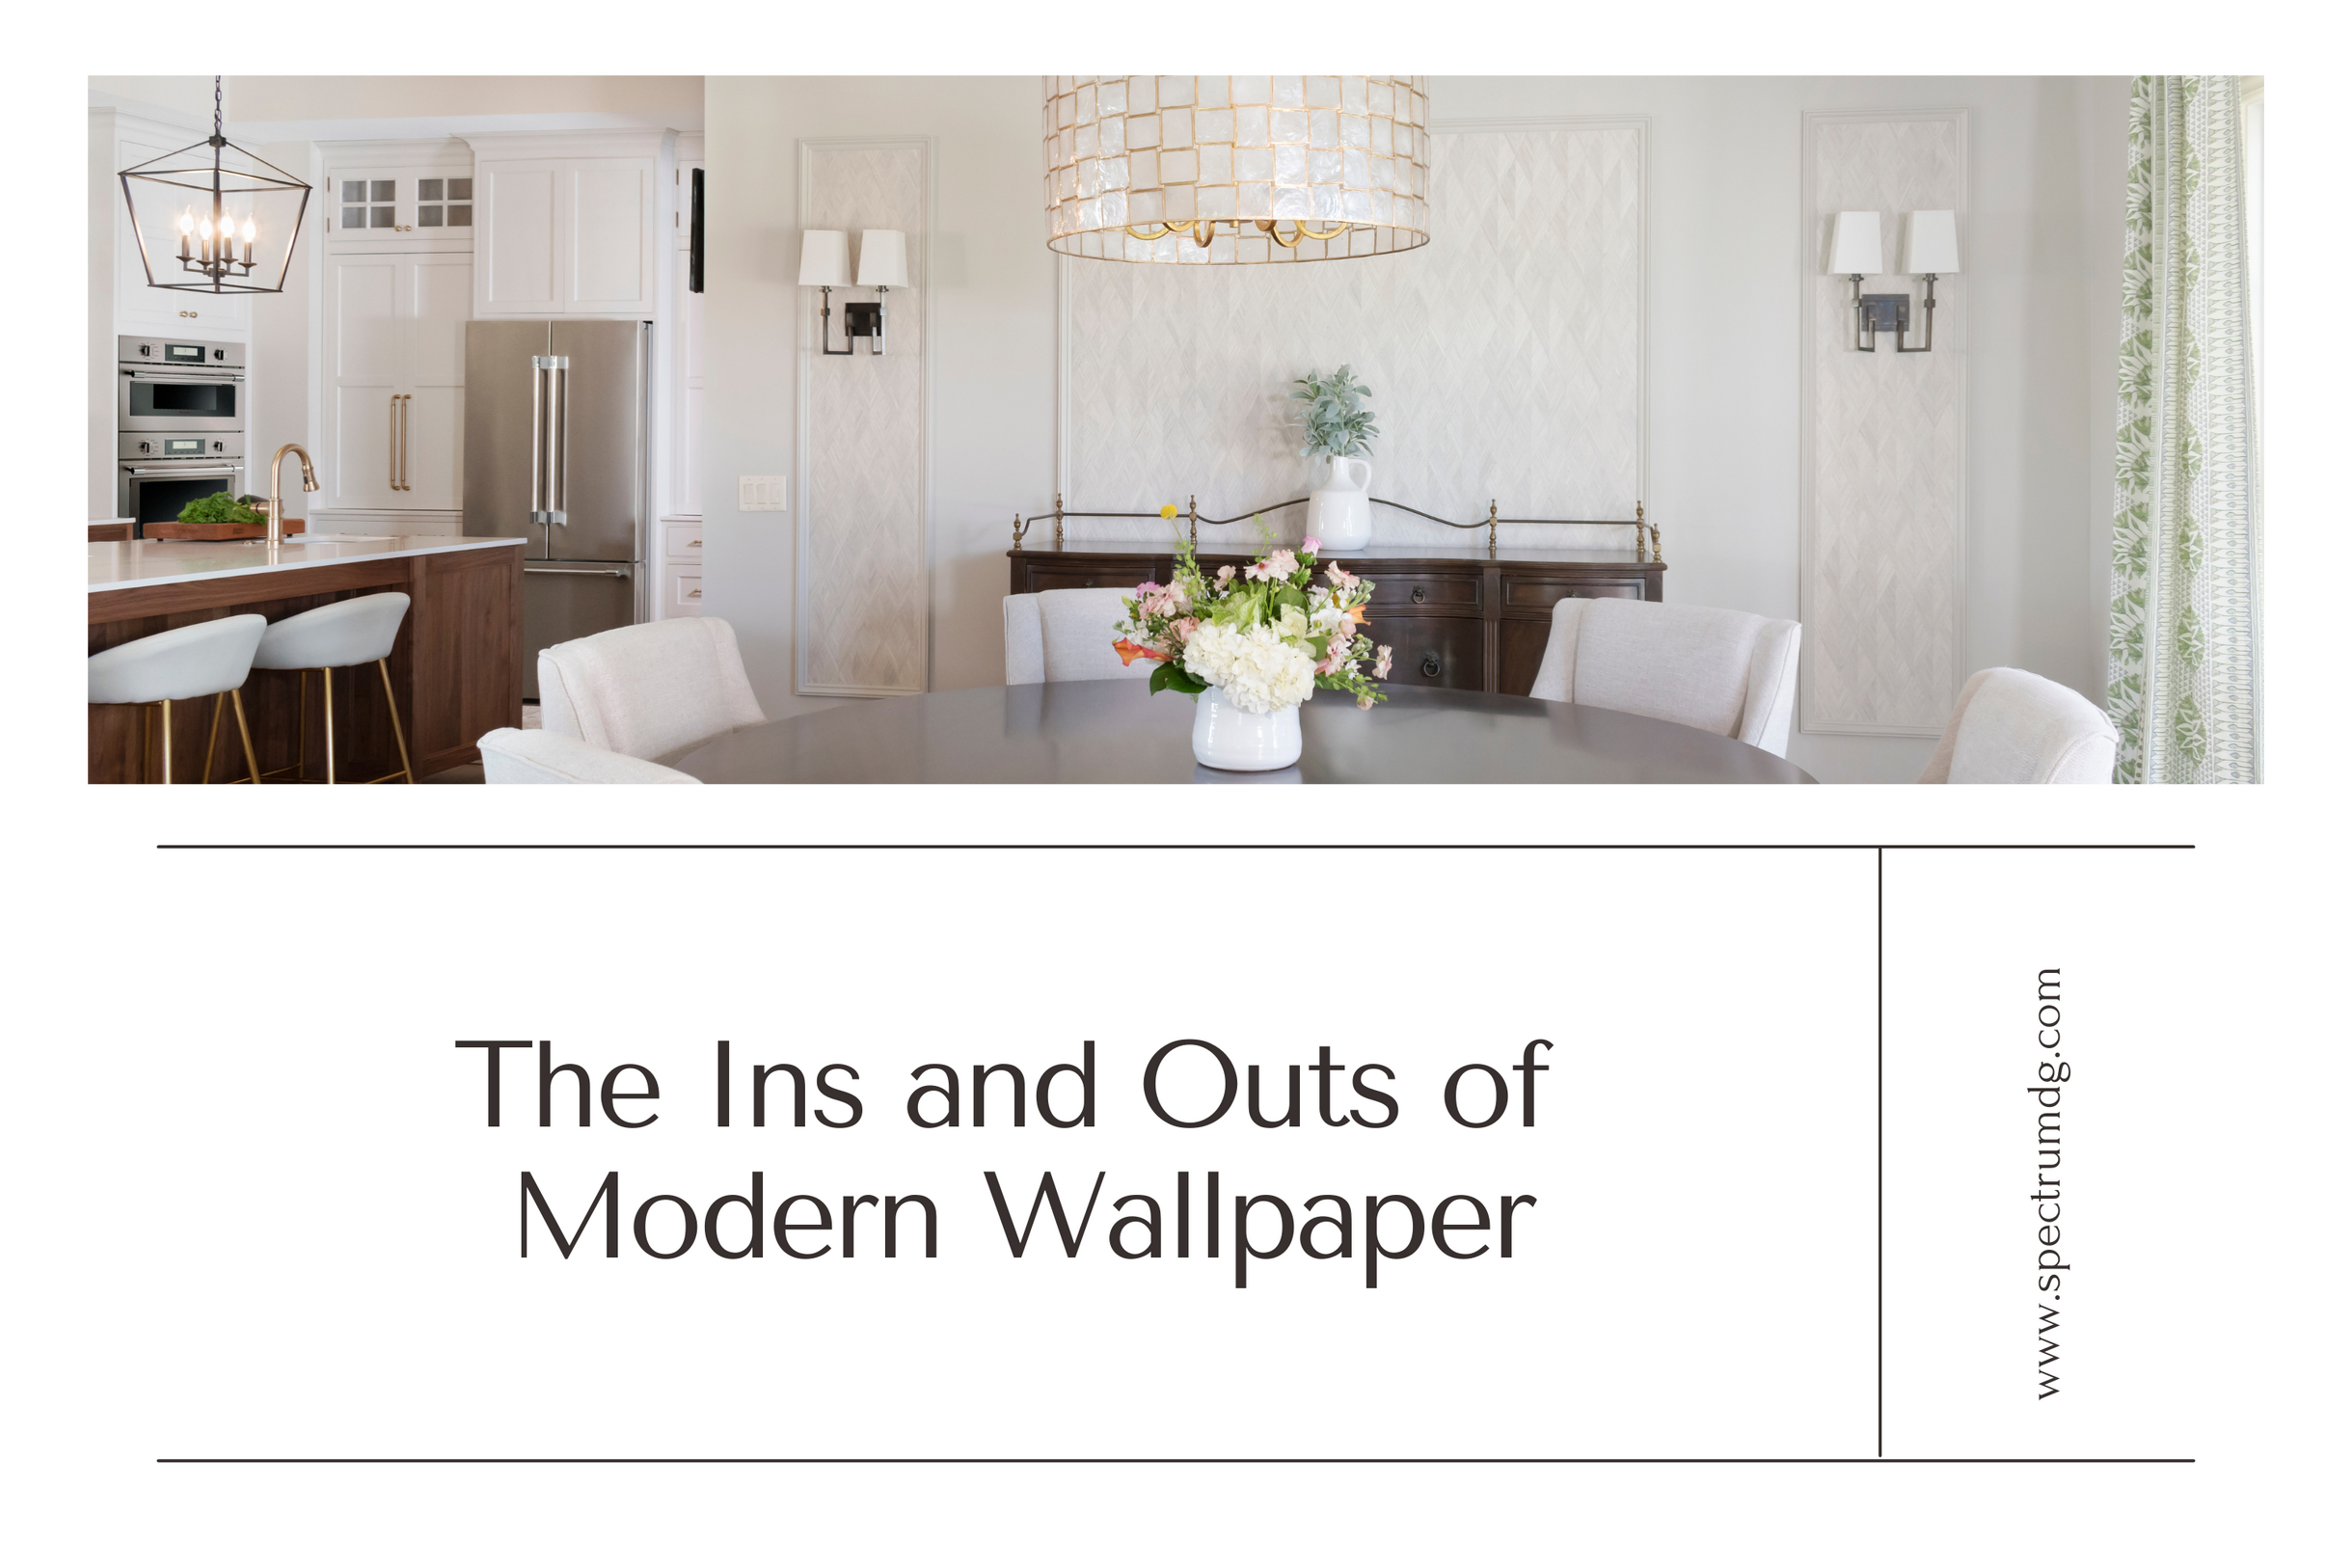 The Ins and Outs of Modern Wallpaper